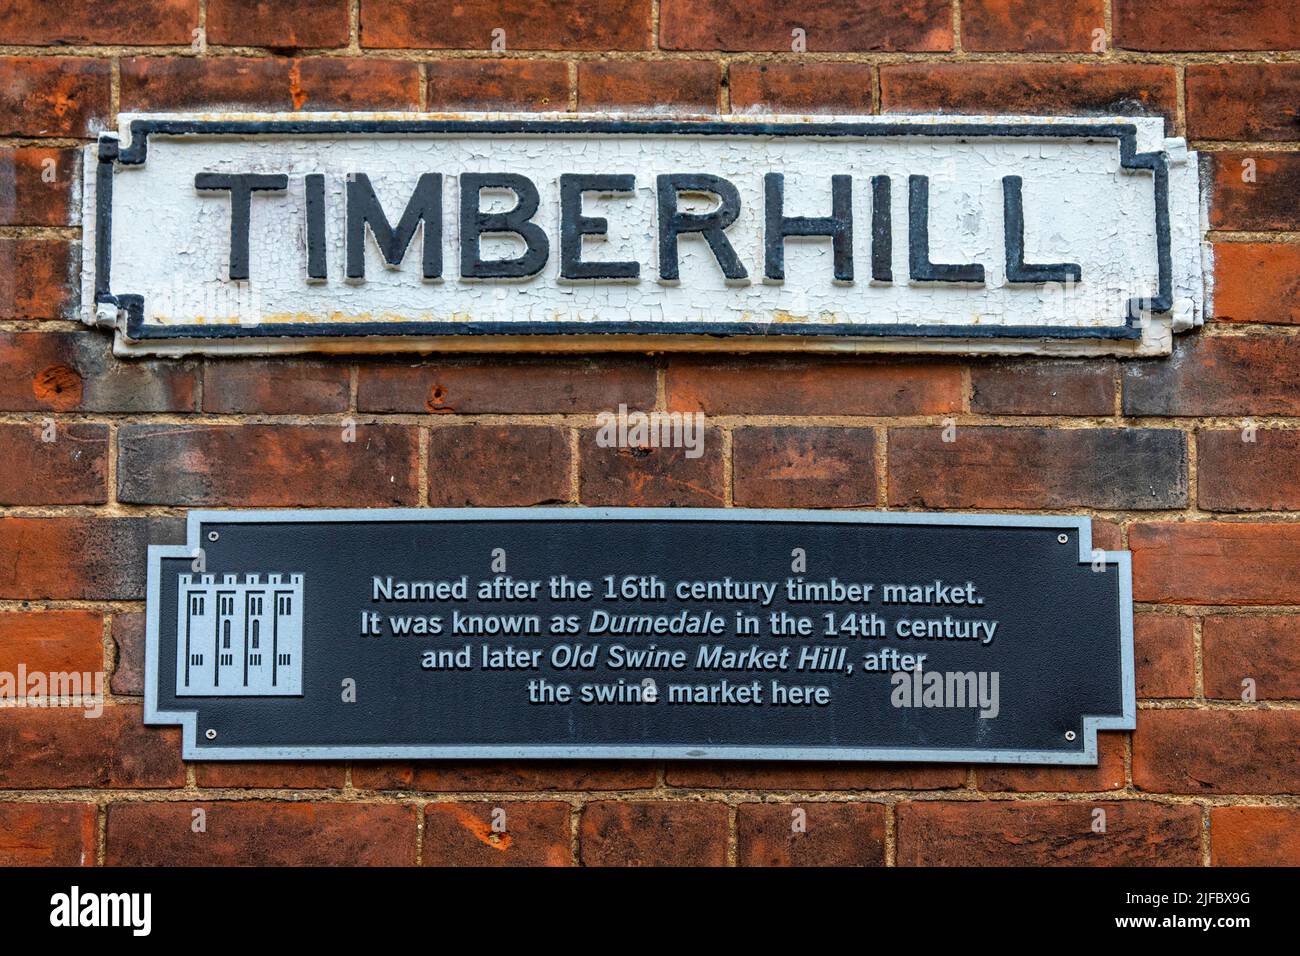 Street sign for Timberhill and information sign detailing the history of the location, in the city of Norwich in Norfolk, UK. Stock Photo